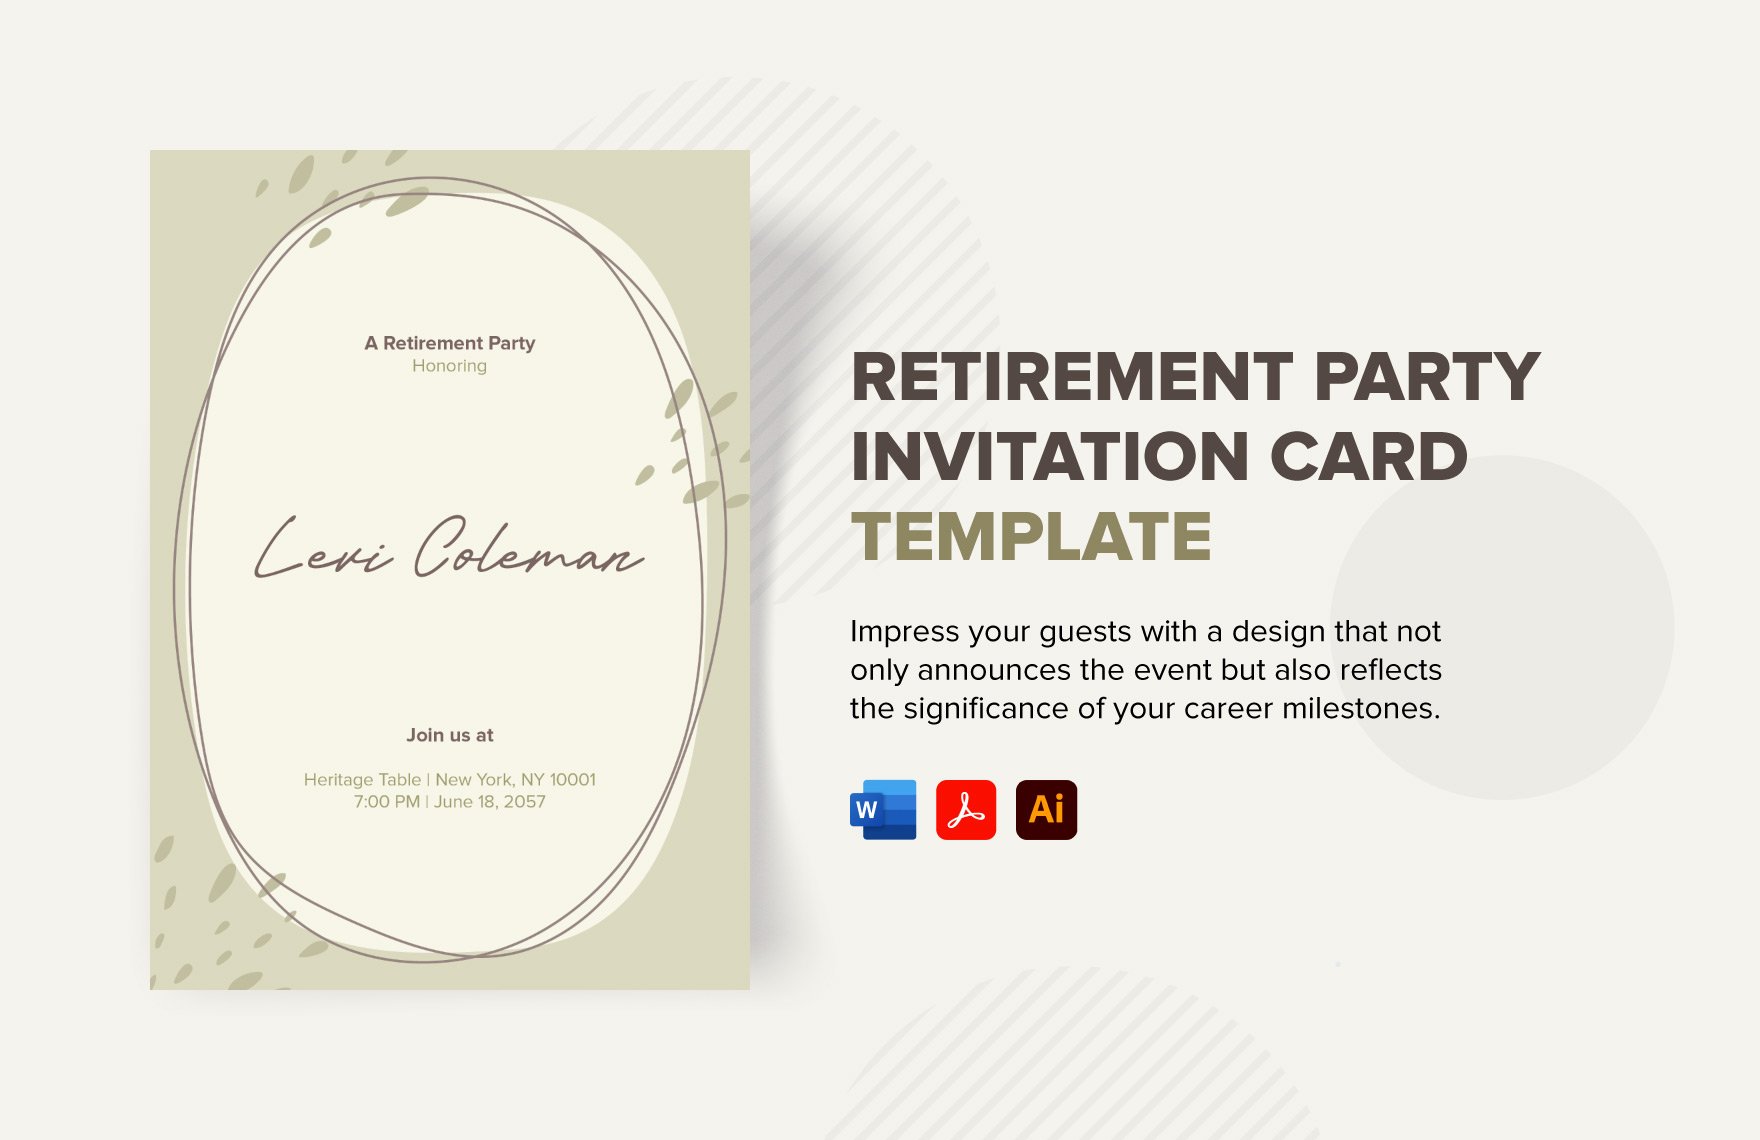 Retirement Party Invitation Card Template in Word, PDF, Illustrator, Apple Pages